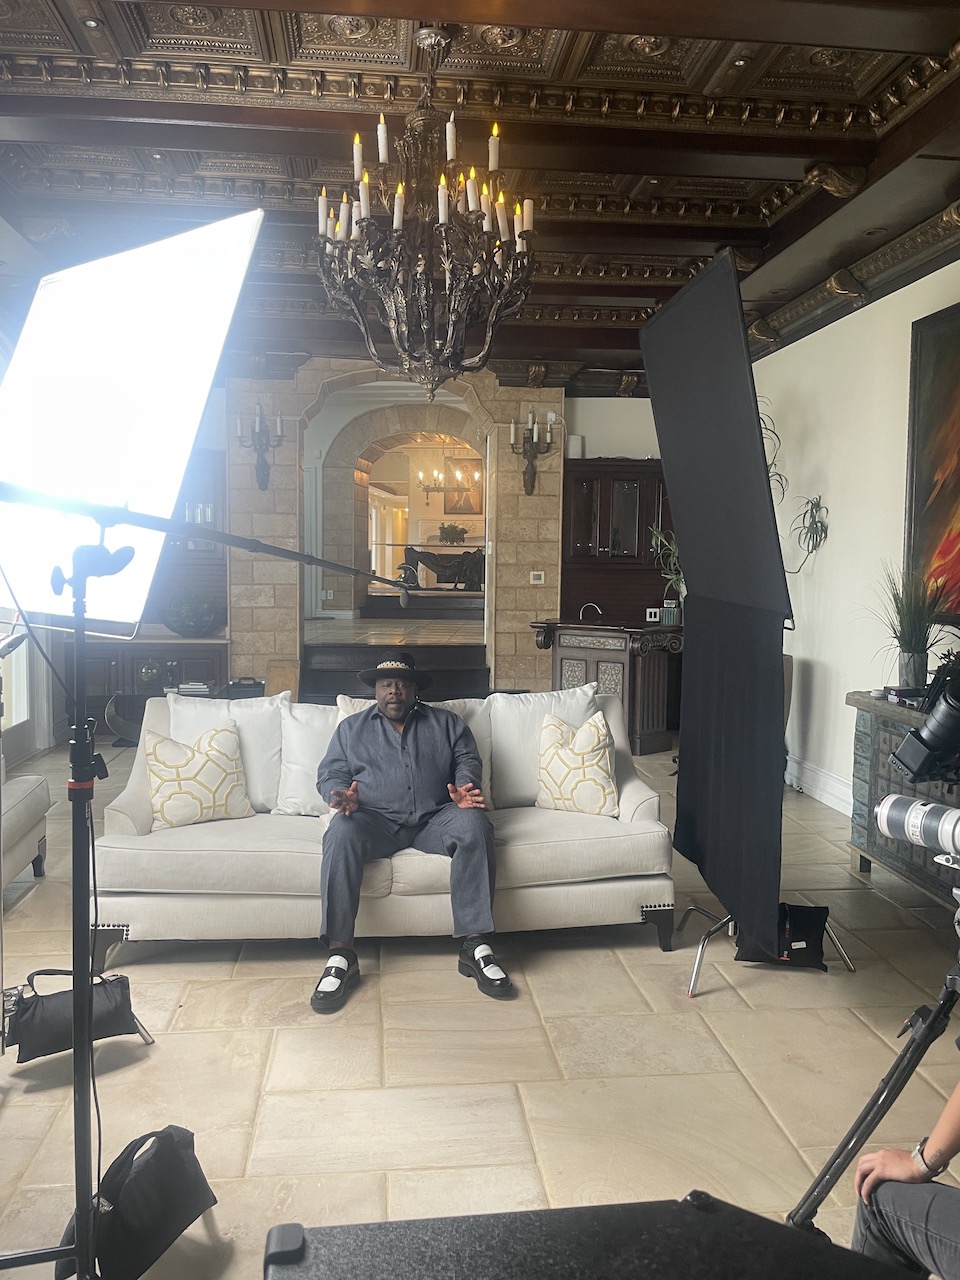 BlackPopBTS Cedric The Entertainer by C I Studios View of set with him sitting on the couch wearing a gray shirt and pants as well as a black hat talking to the camera